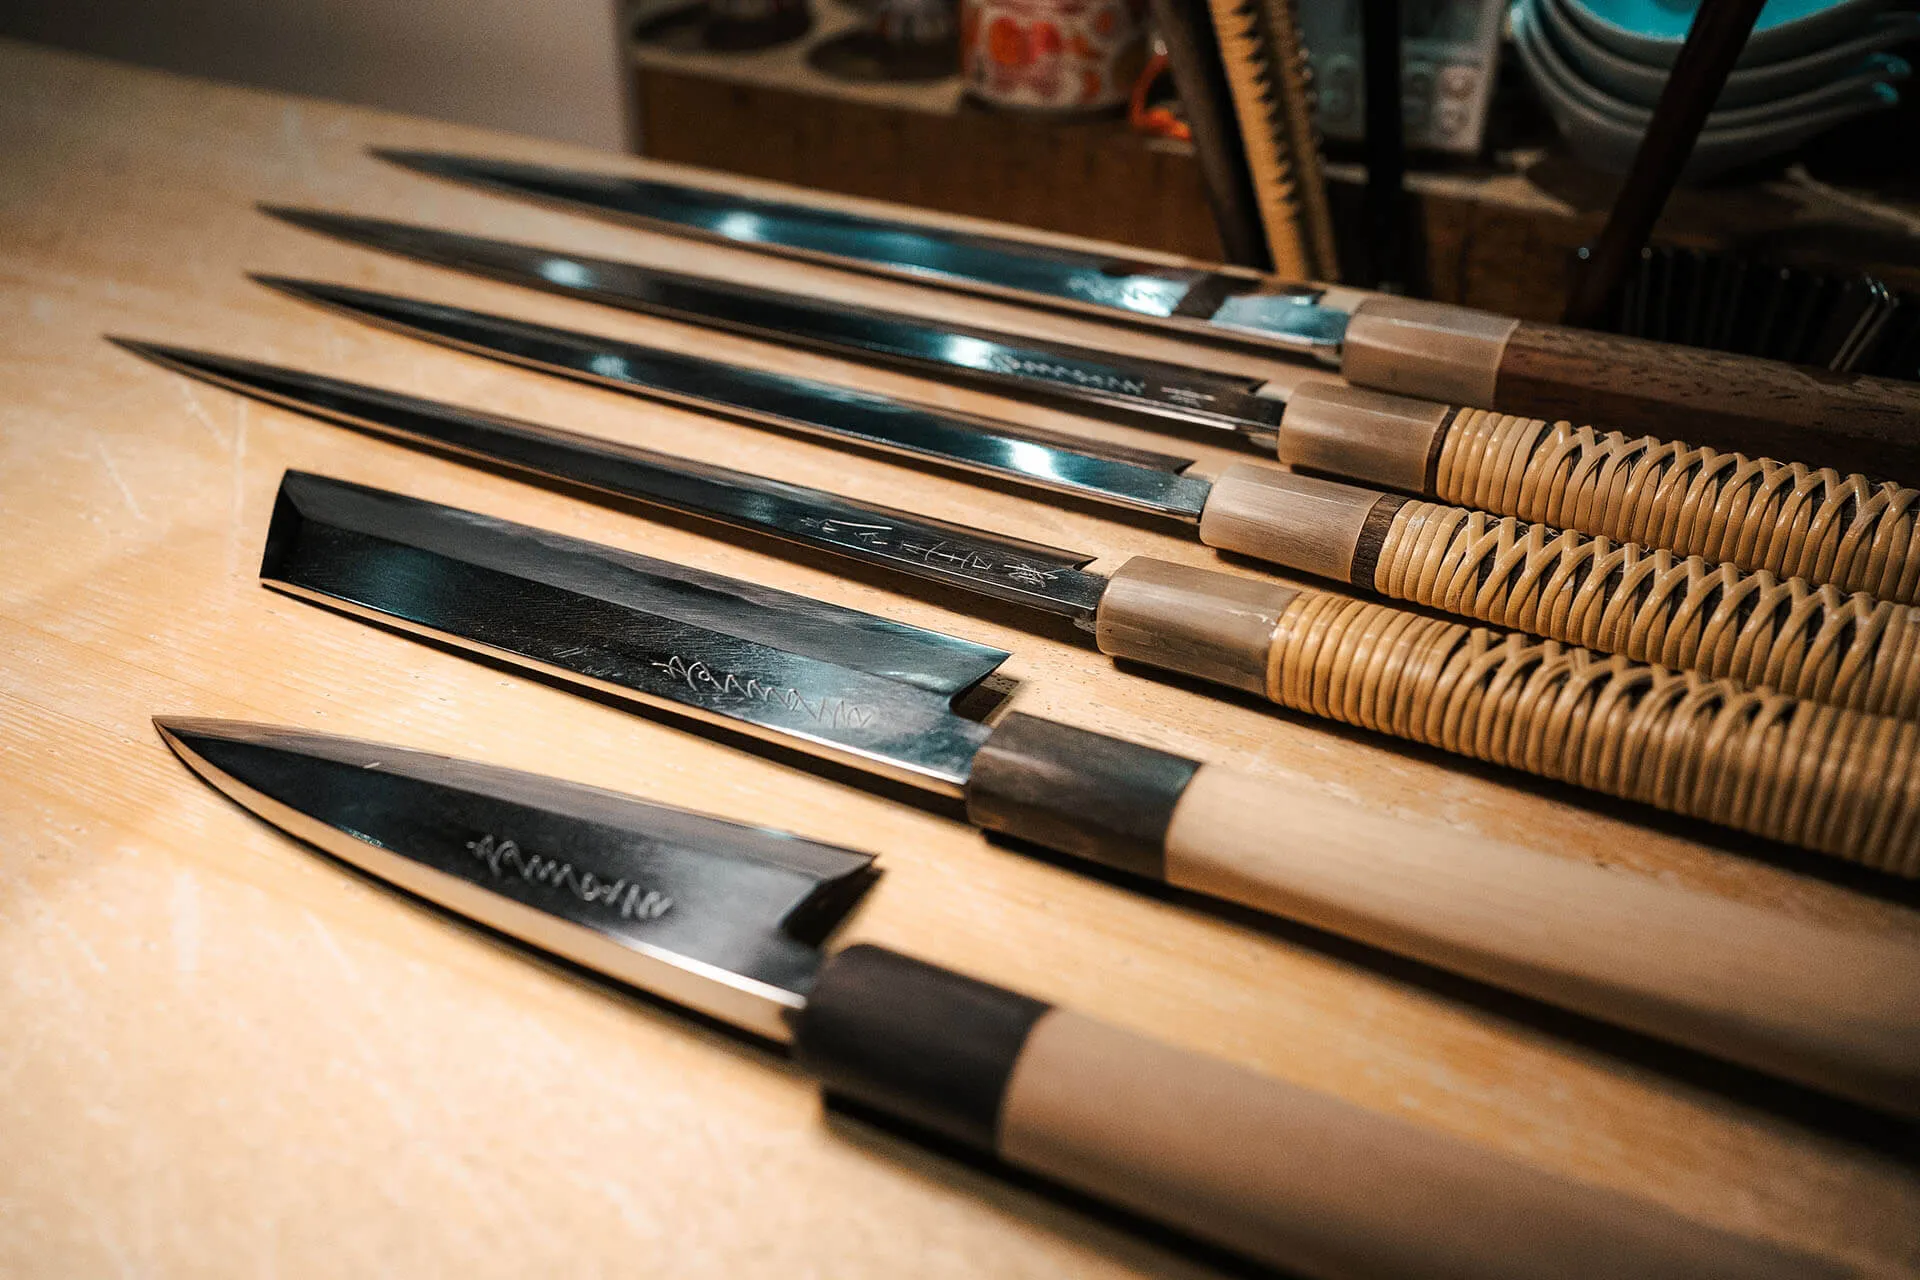 Learning how to maintain Japanese kitchen knives